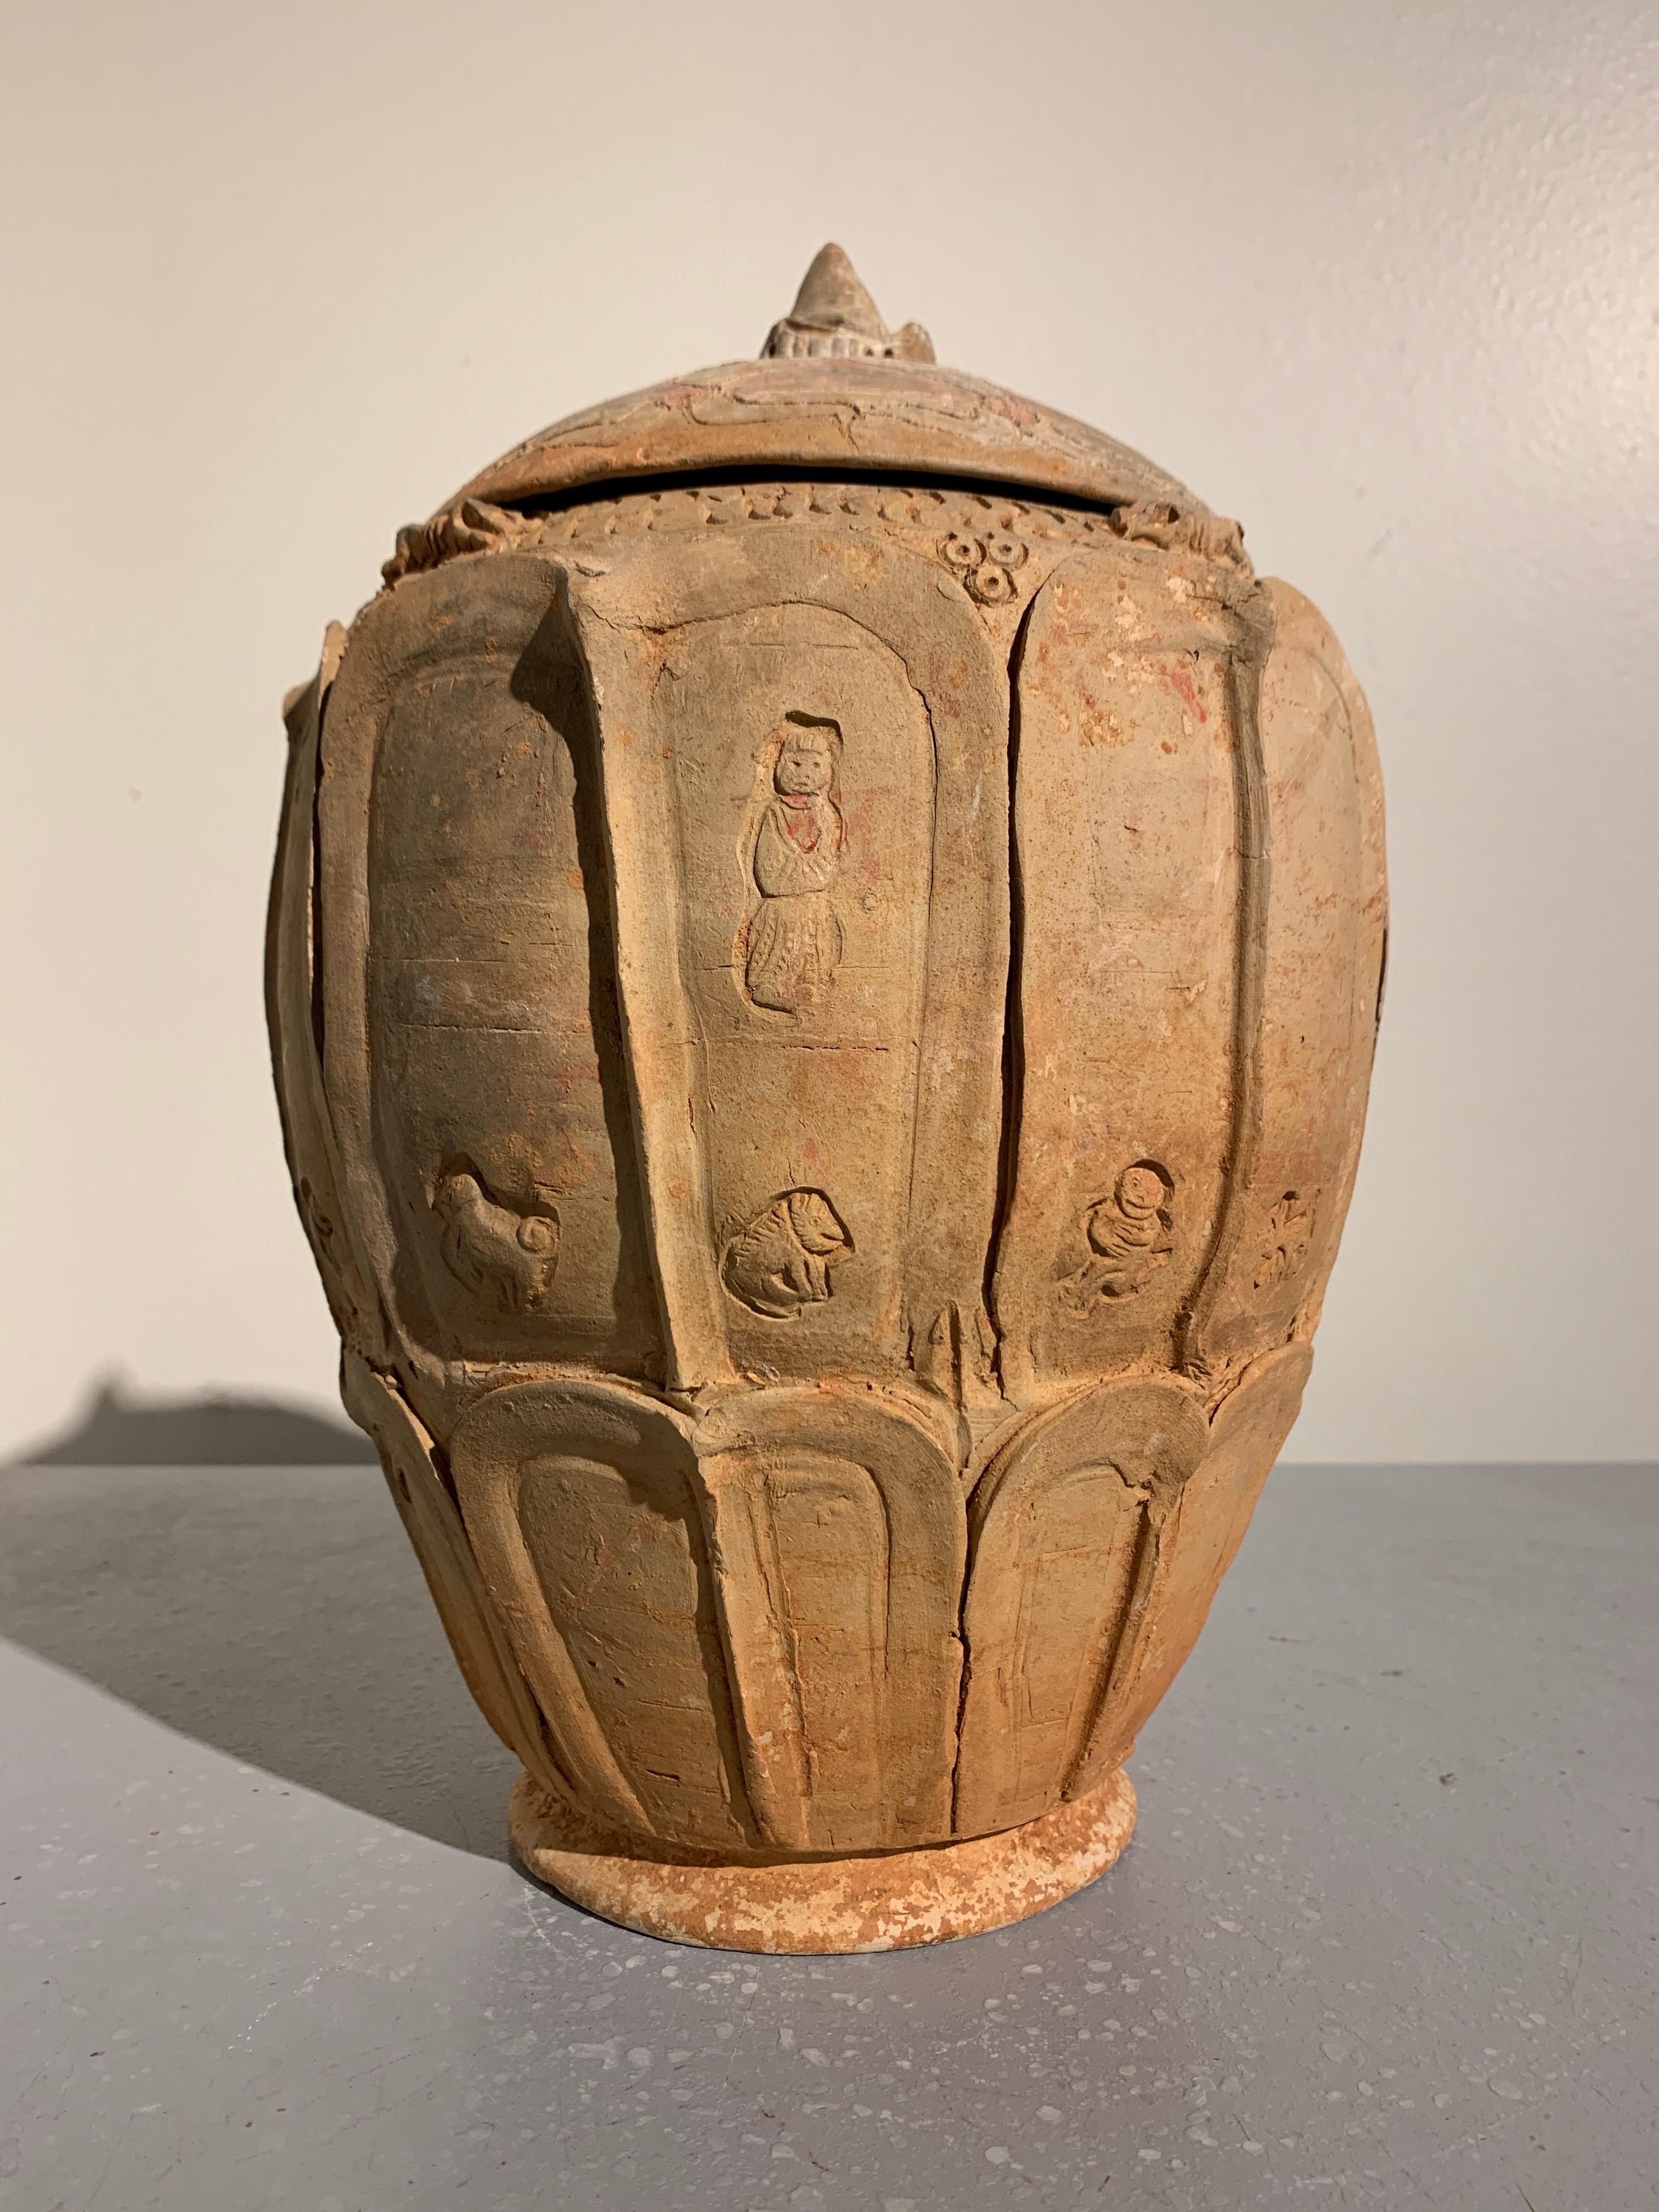 Tang Chinese Pottery Lotus Jar with Zodiac Figures, Five Dynasties, 10th Century